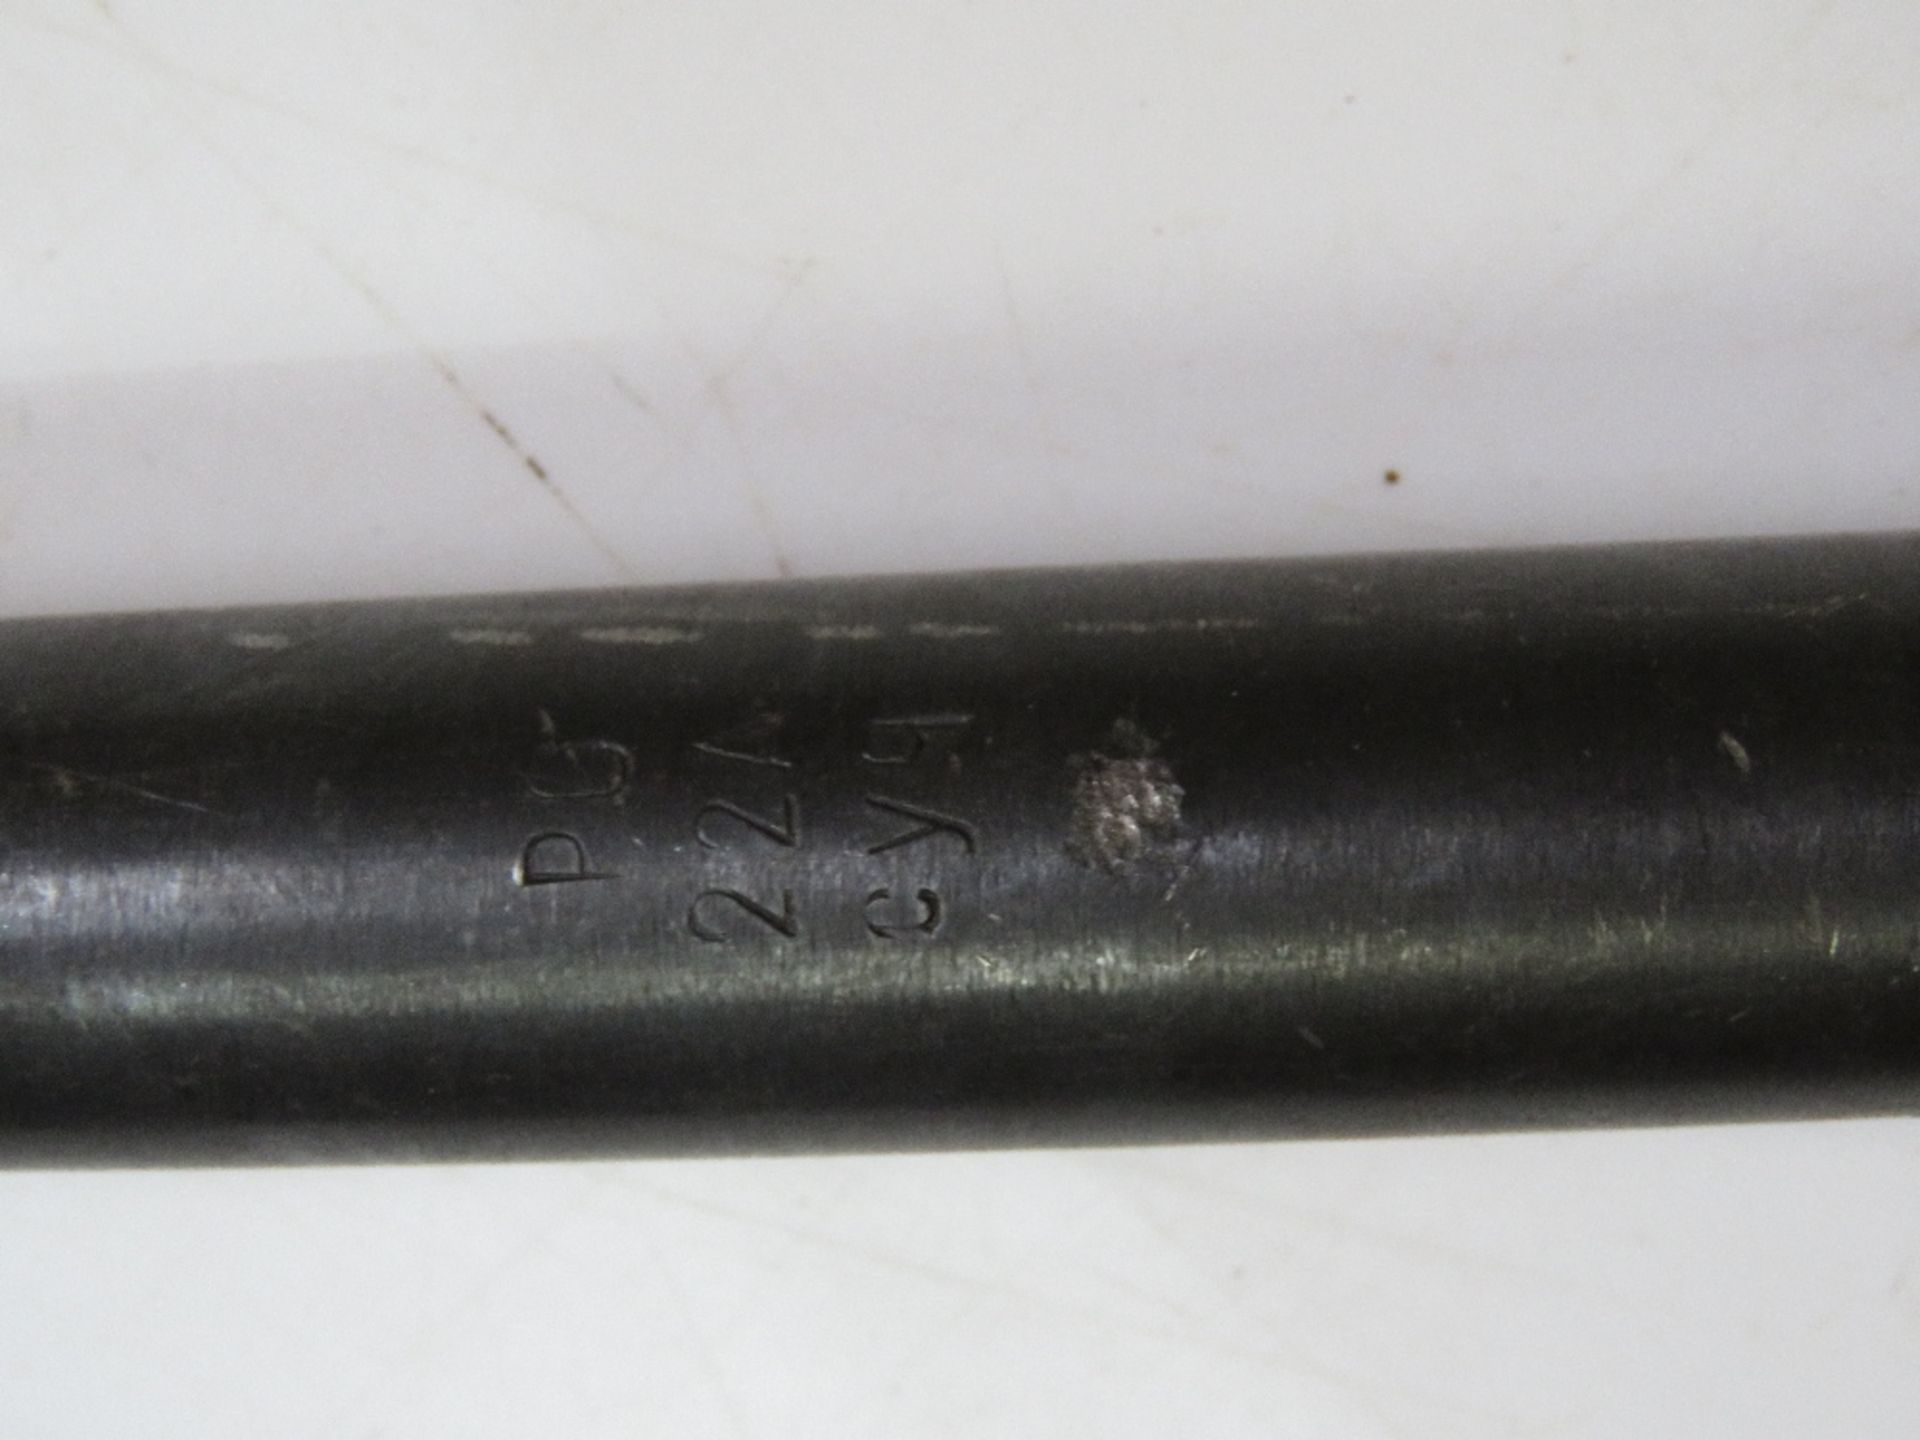 A deactivated MG42 spare barrel bearing maker's mark 'cyq', with certificate. - Image 2 of 2